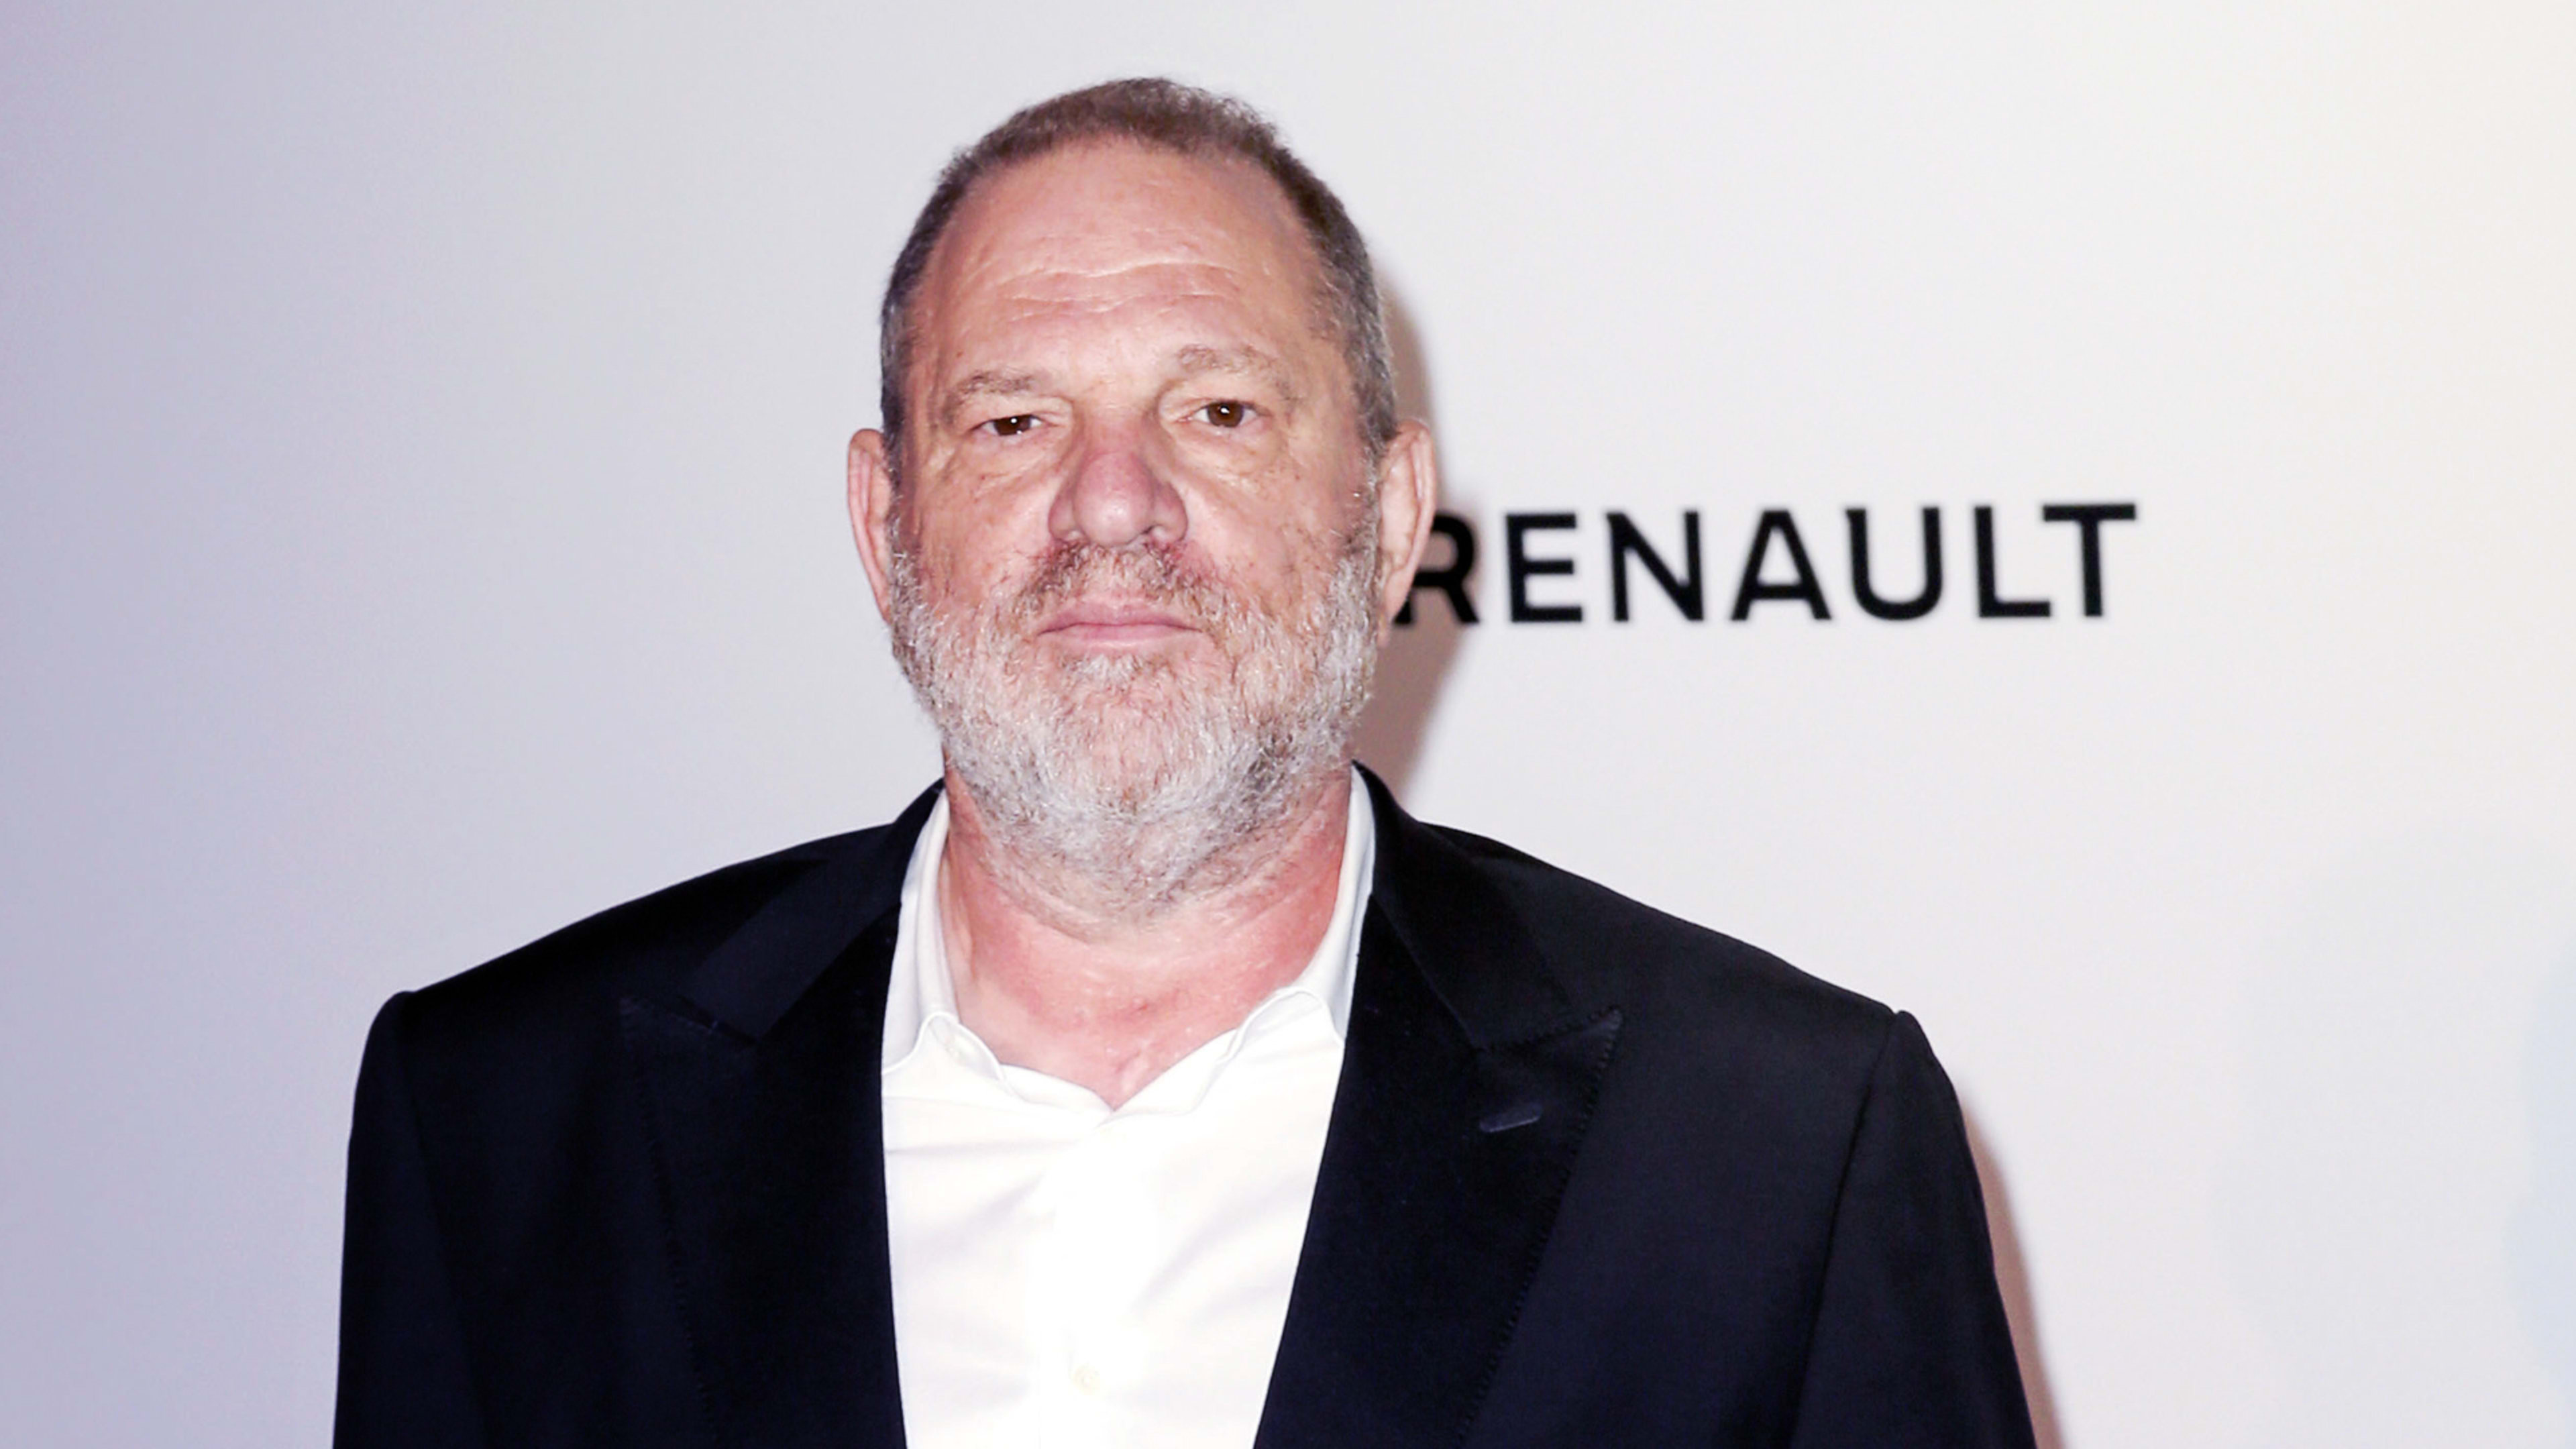 Reports: Harvey Weinstein will face abuse charges in New York and plans to surrender